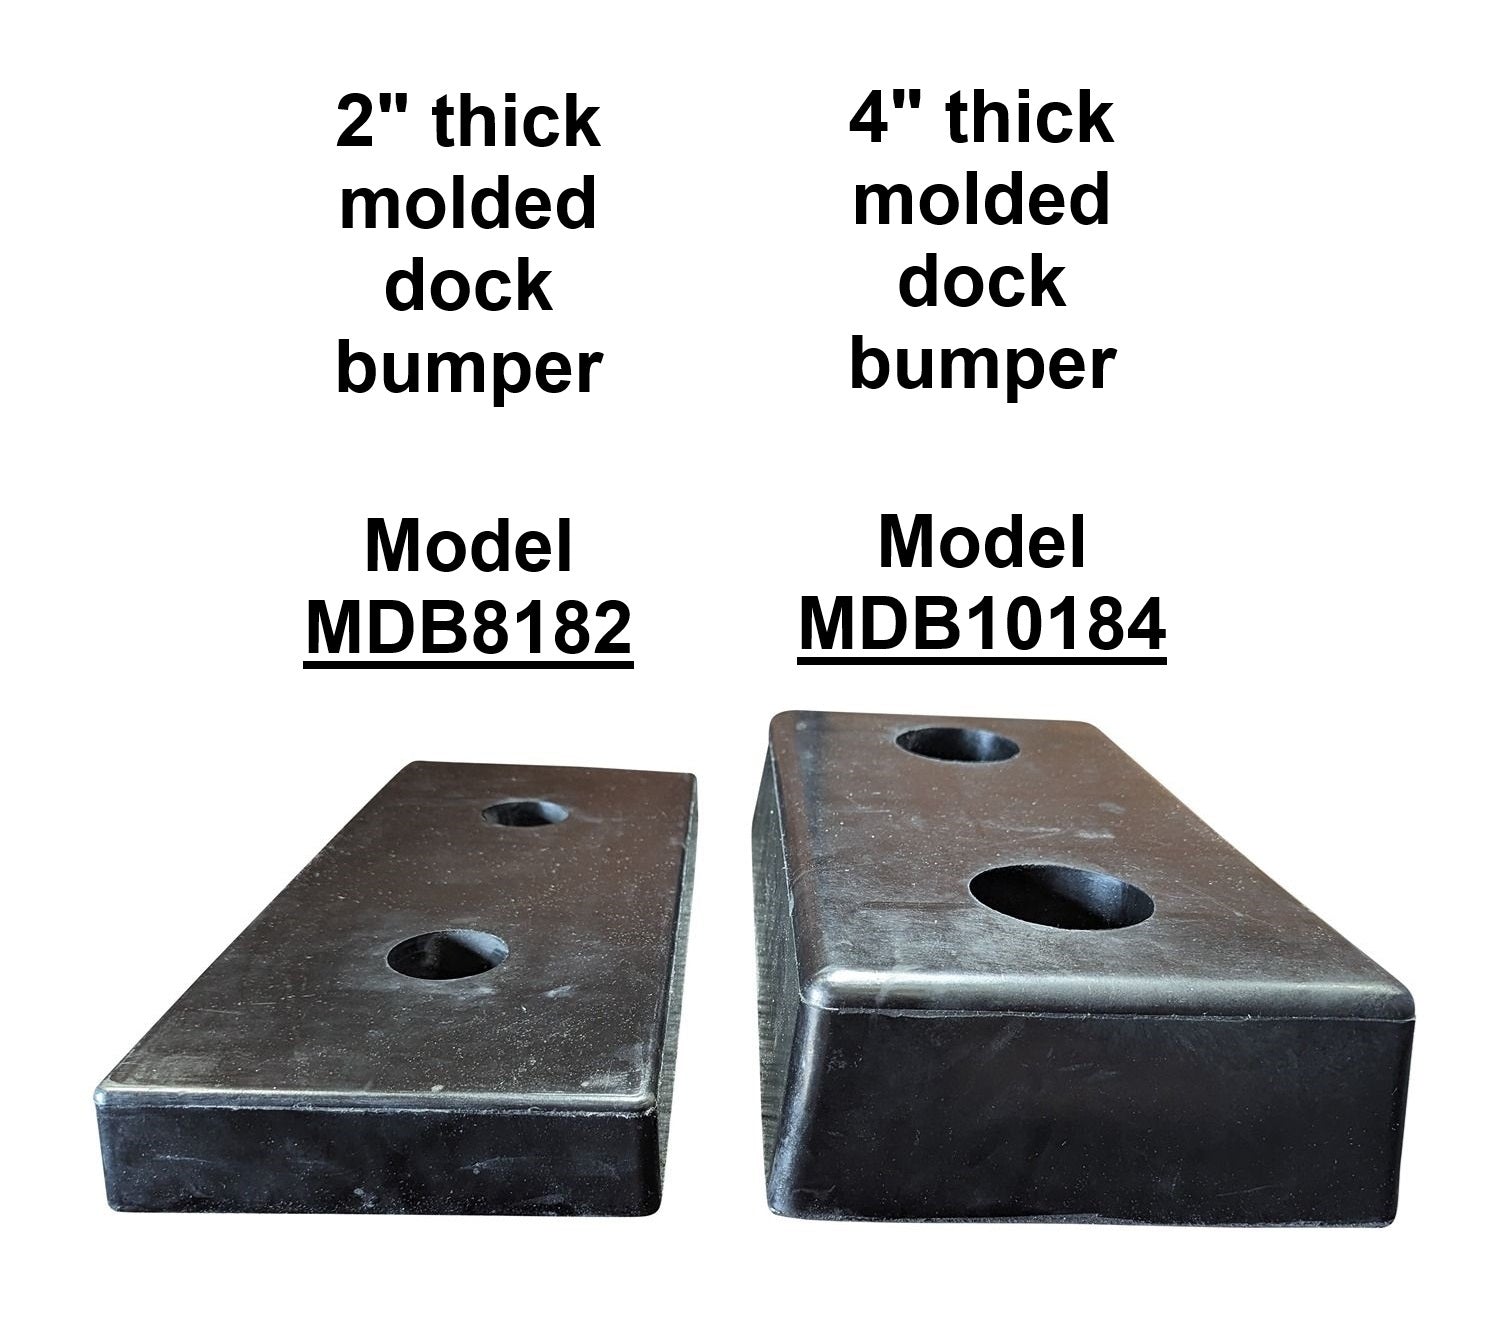 Molded dock bumper 4" compared to 2" model